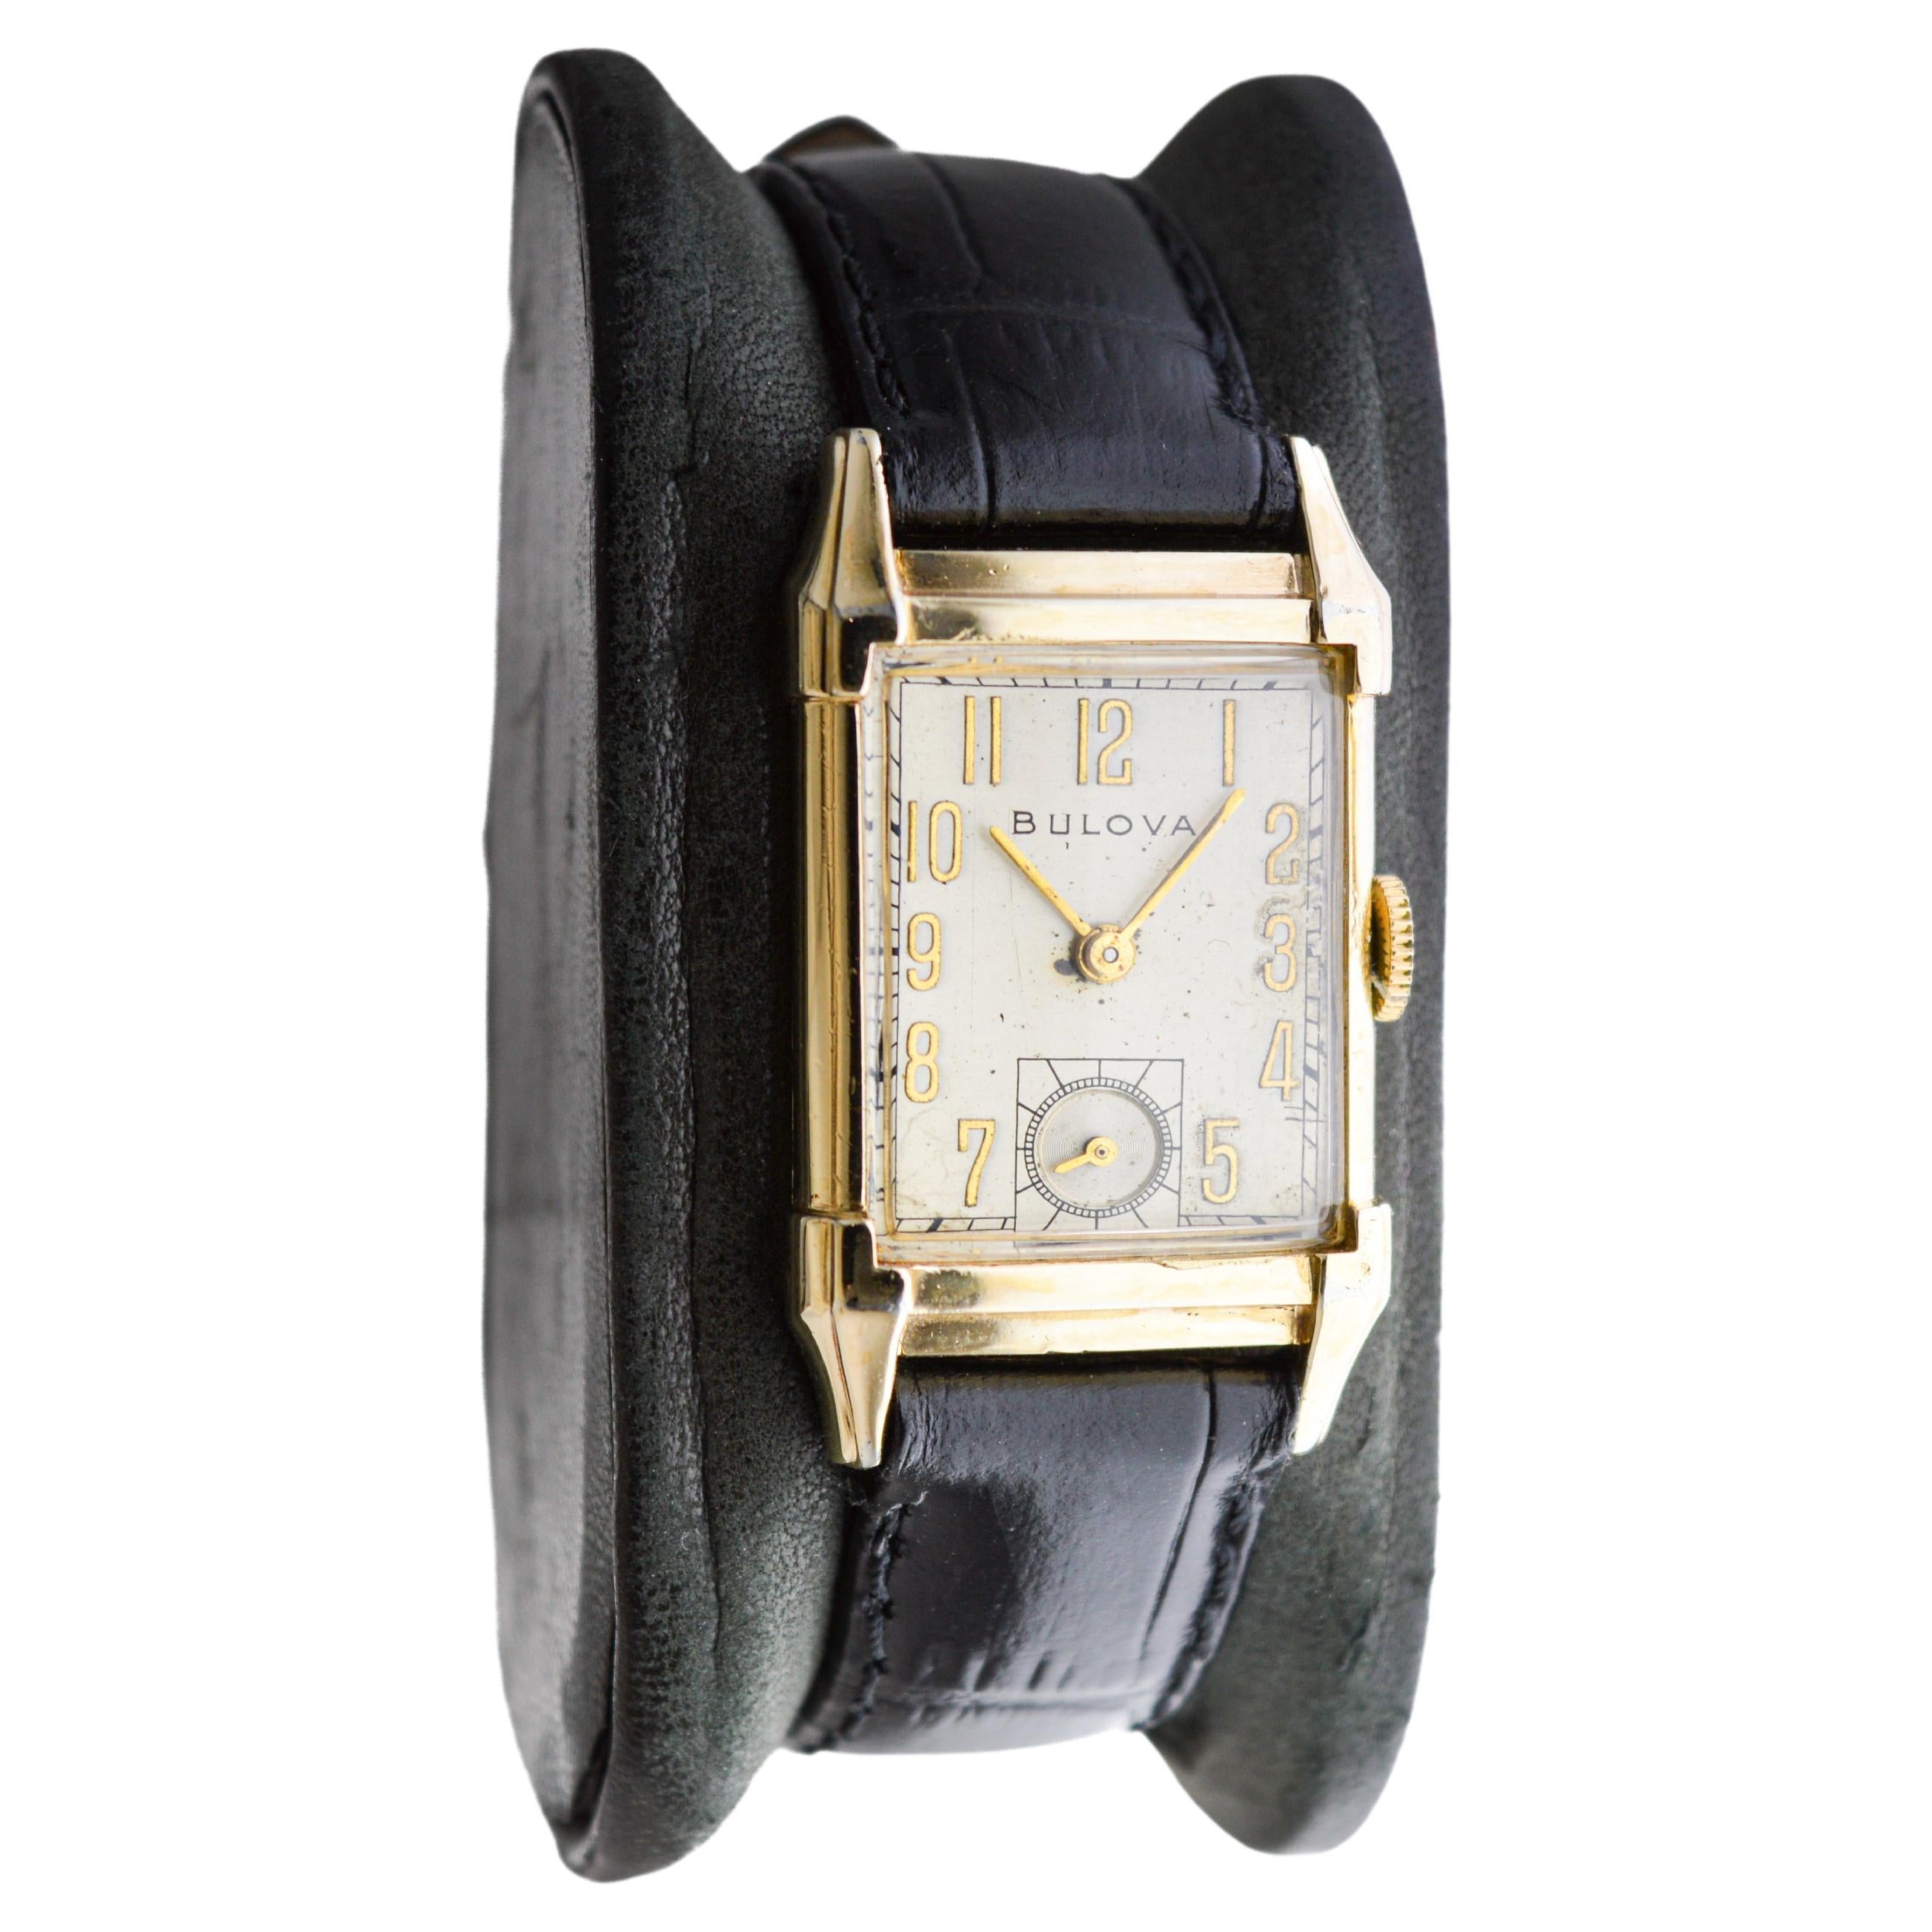 FACTORY / HOUSE: Bulova Watch Company
STYLE / REFERENCE: Art Deco / Tank Style 
METAL / MATERIAL: Yellow Gold Filled
CIRCA / YEAR: 1950's
DIMENSIONS / SIZE: Length 32mm X Width 21mm
MOVEMENT / CALIBER: Manual Winding / 21 Jewels / Caliber 7AK
DIAL /